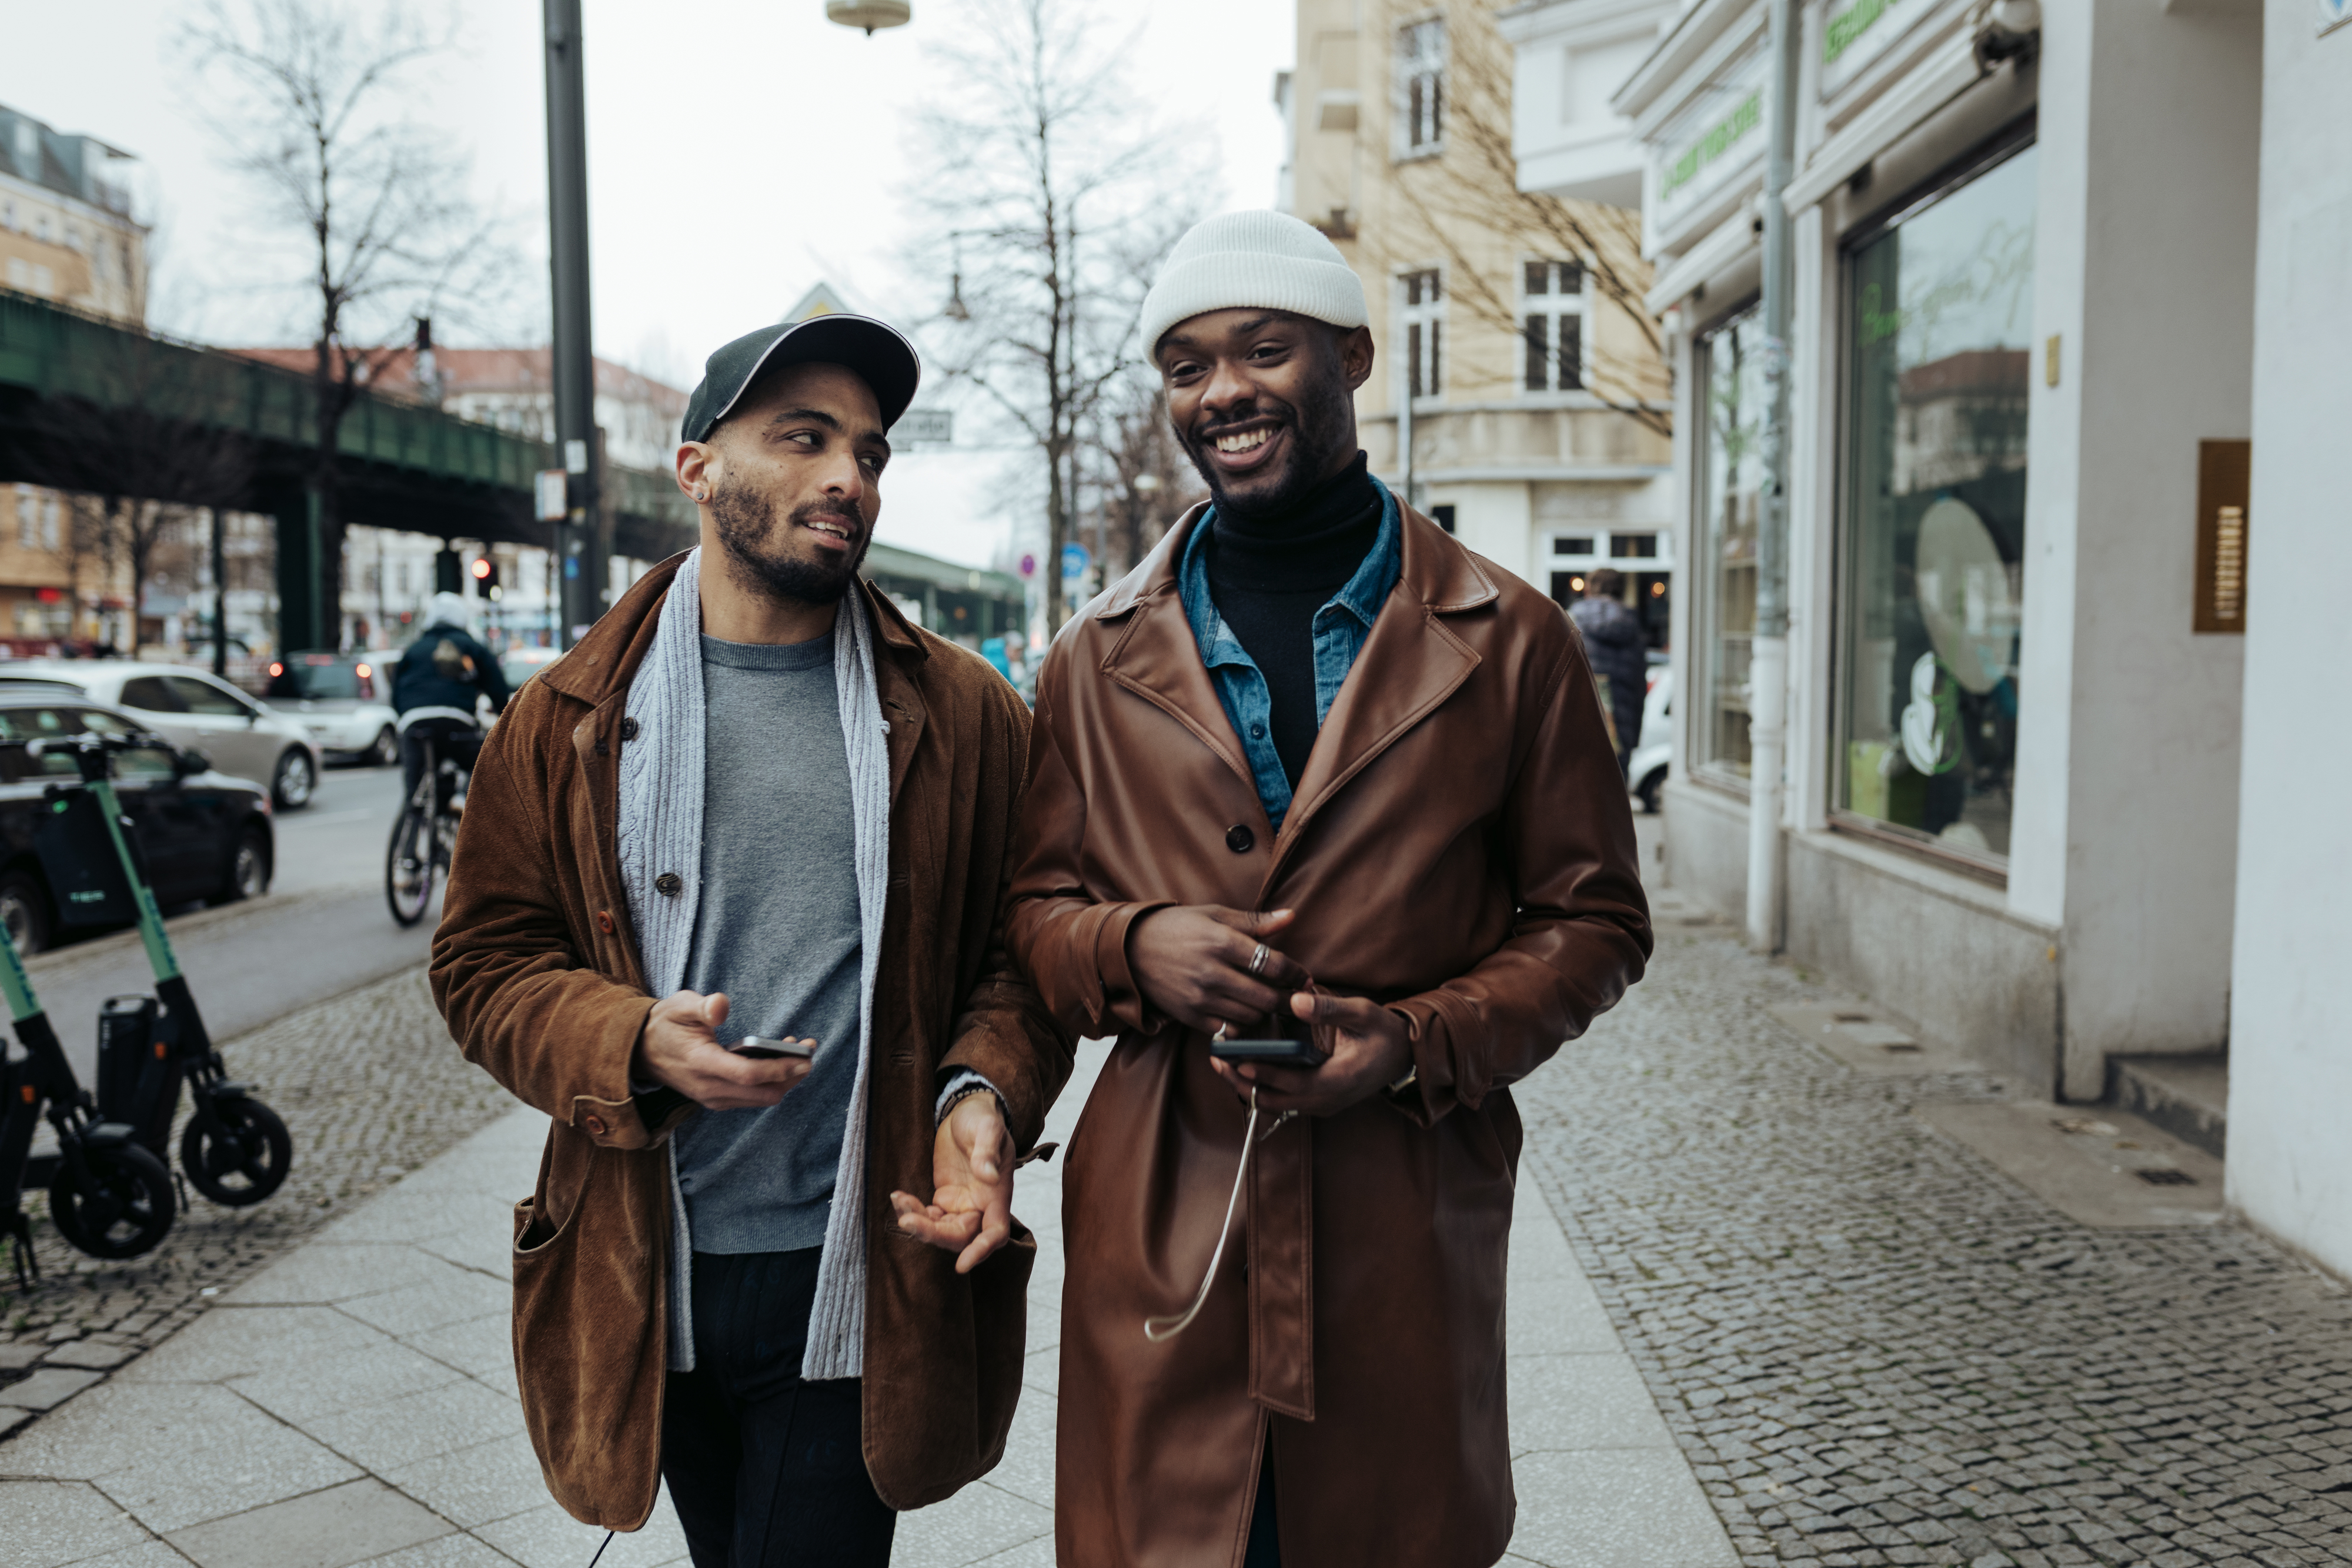 Two men, both wearing hats and brown coats, walk on a city sidewalk smiling and holding smartphones. They appear to be having a friendly conversation